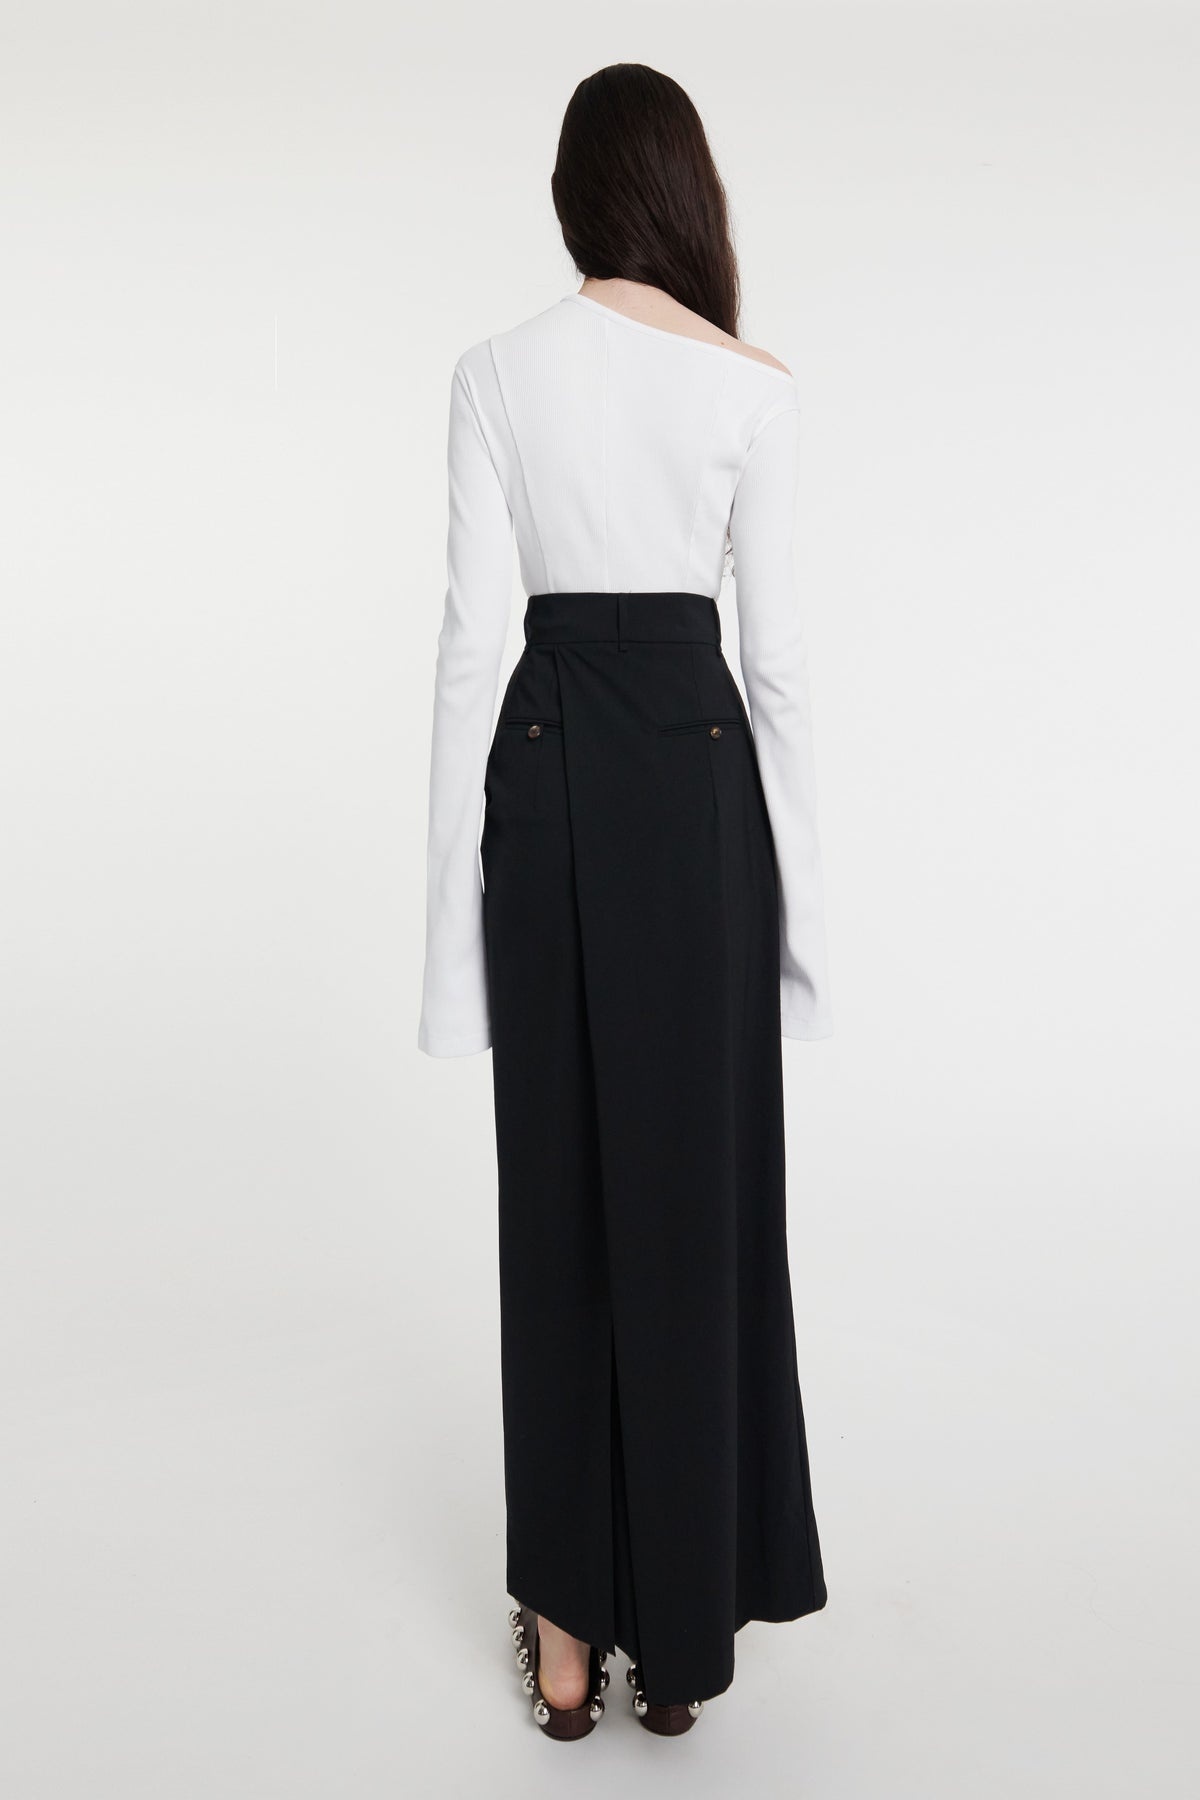 DECONSTRUCTED TROUSERS SKIRT BLACK - 3